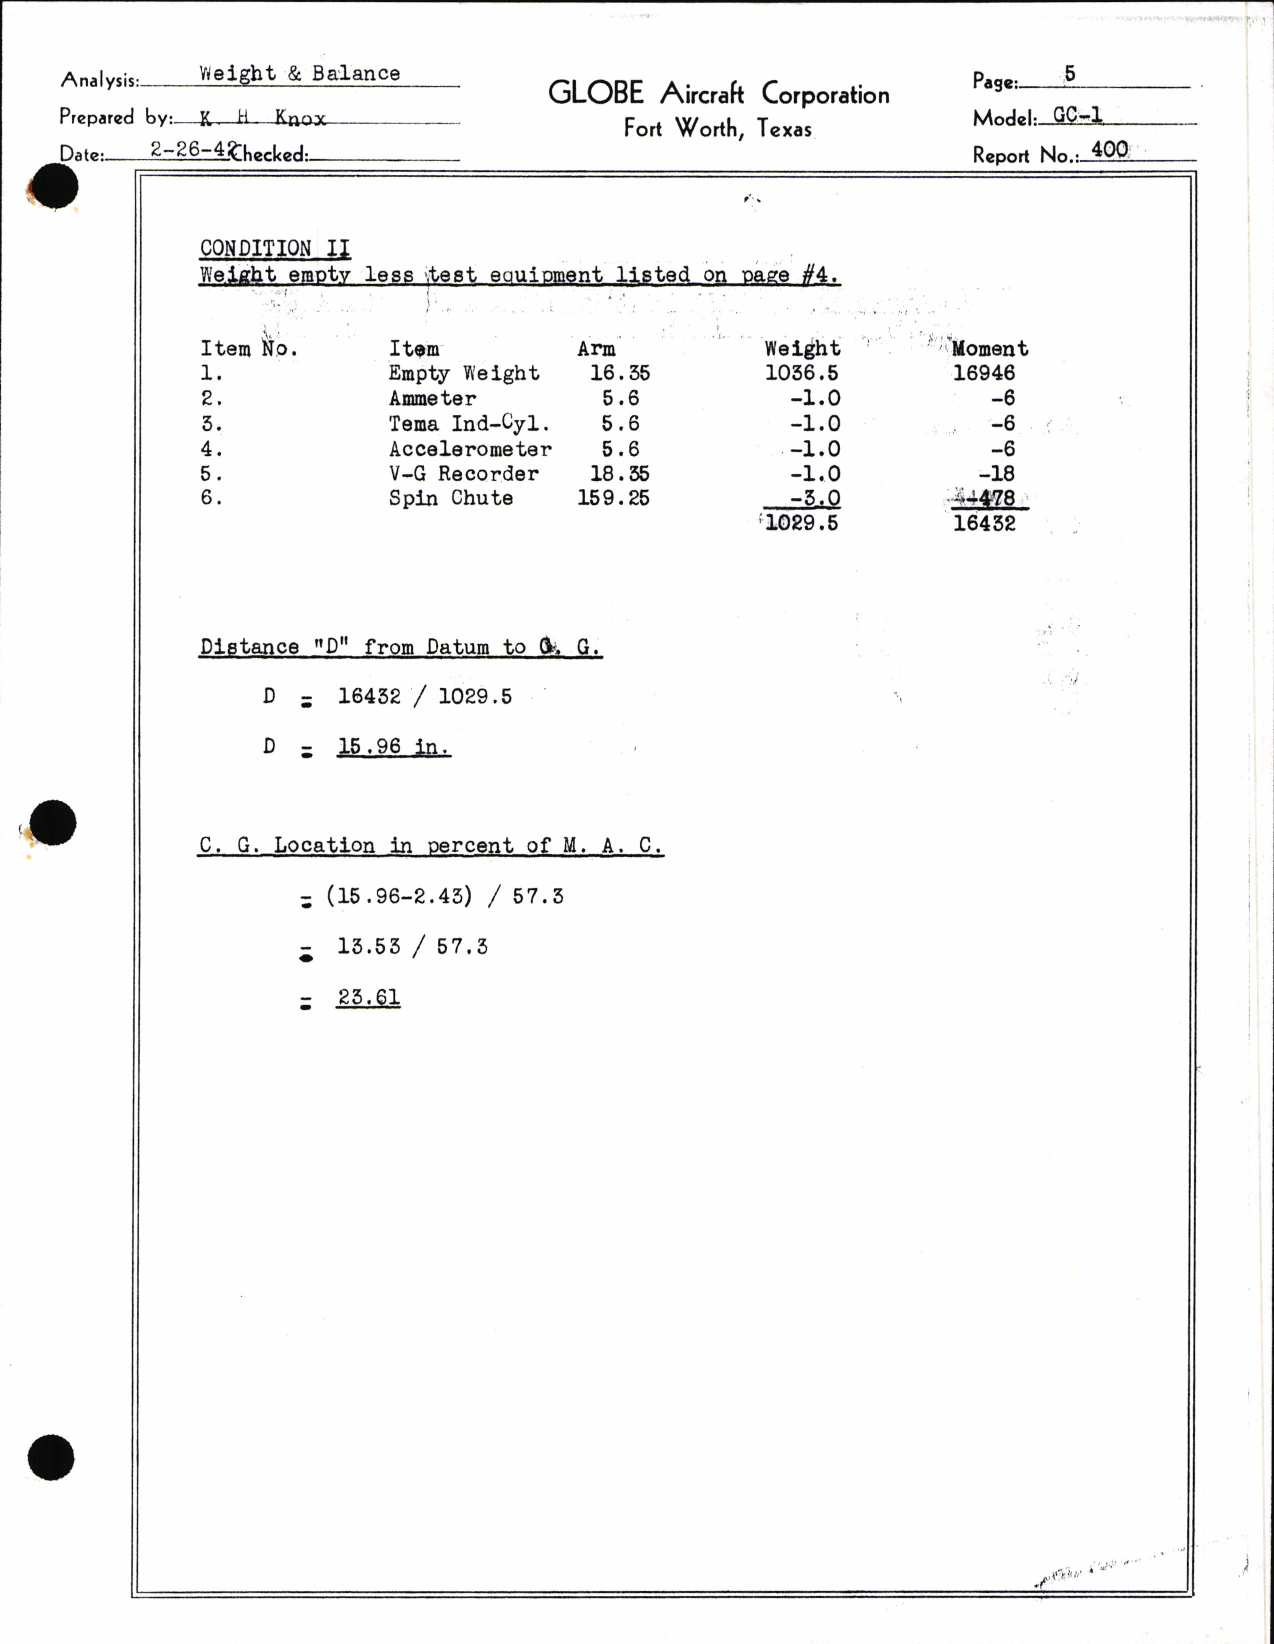 Sample page 4 from AirCorps Library document: Weight and Balance Data for Globe Model GC-1